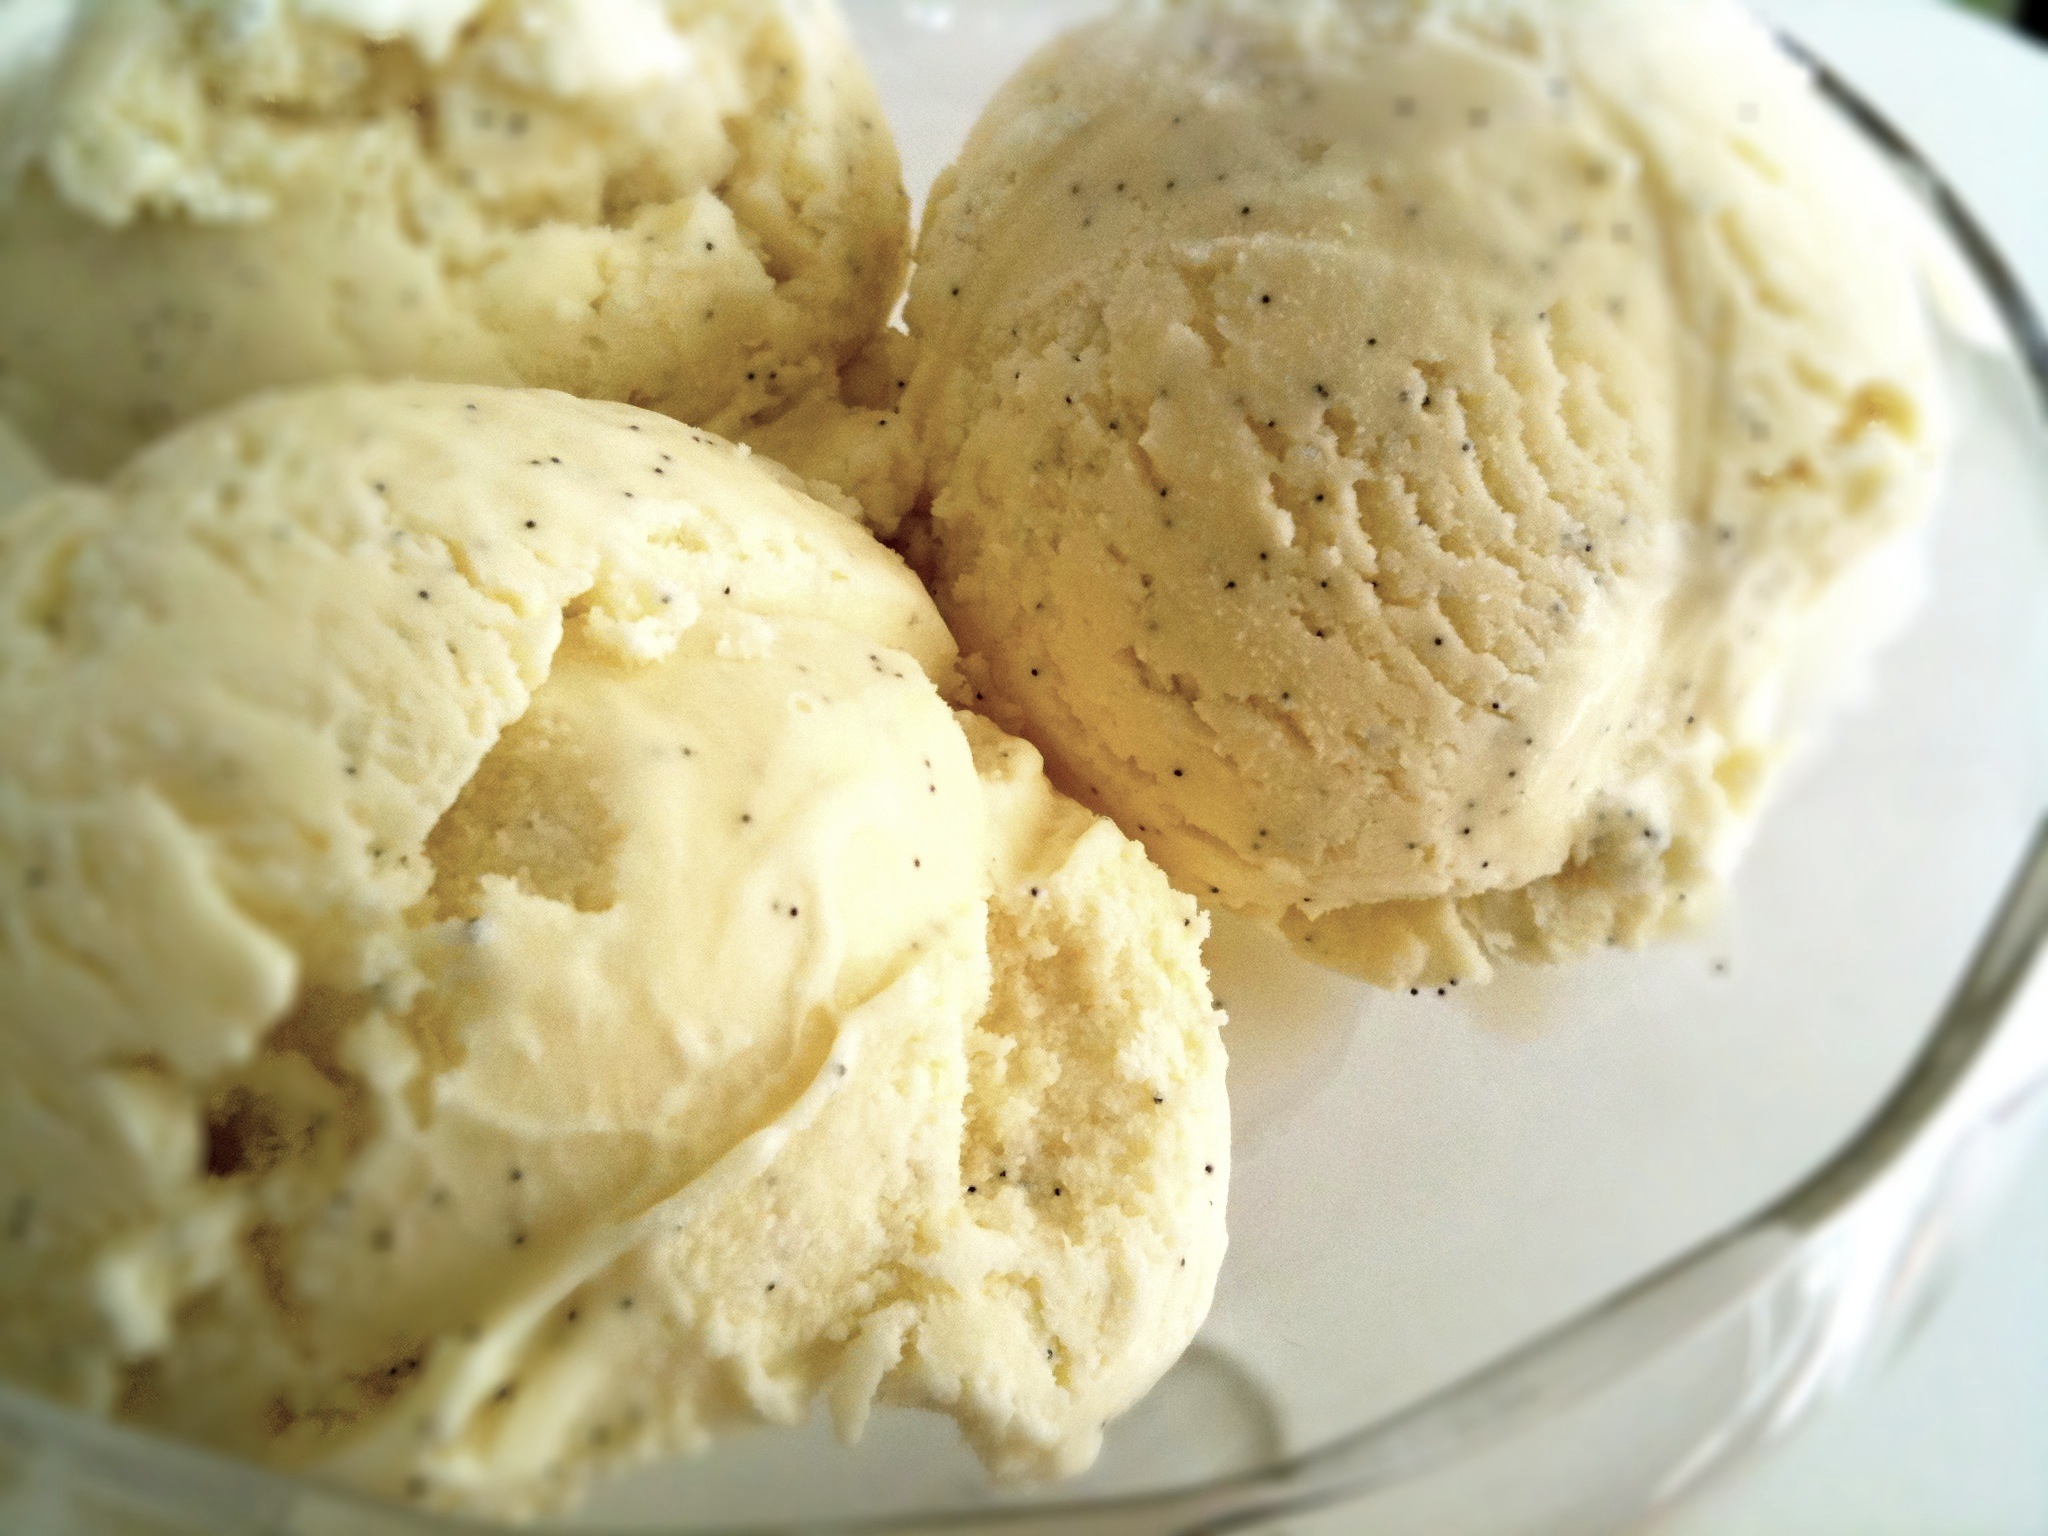 With spring returning, what better way to celebrate than to have homemade ice-cream. There's a guilty pleasure I take watching as it churns in the machine, ...